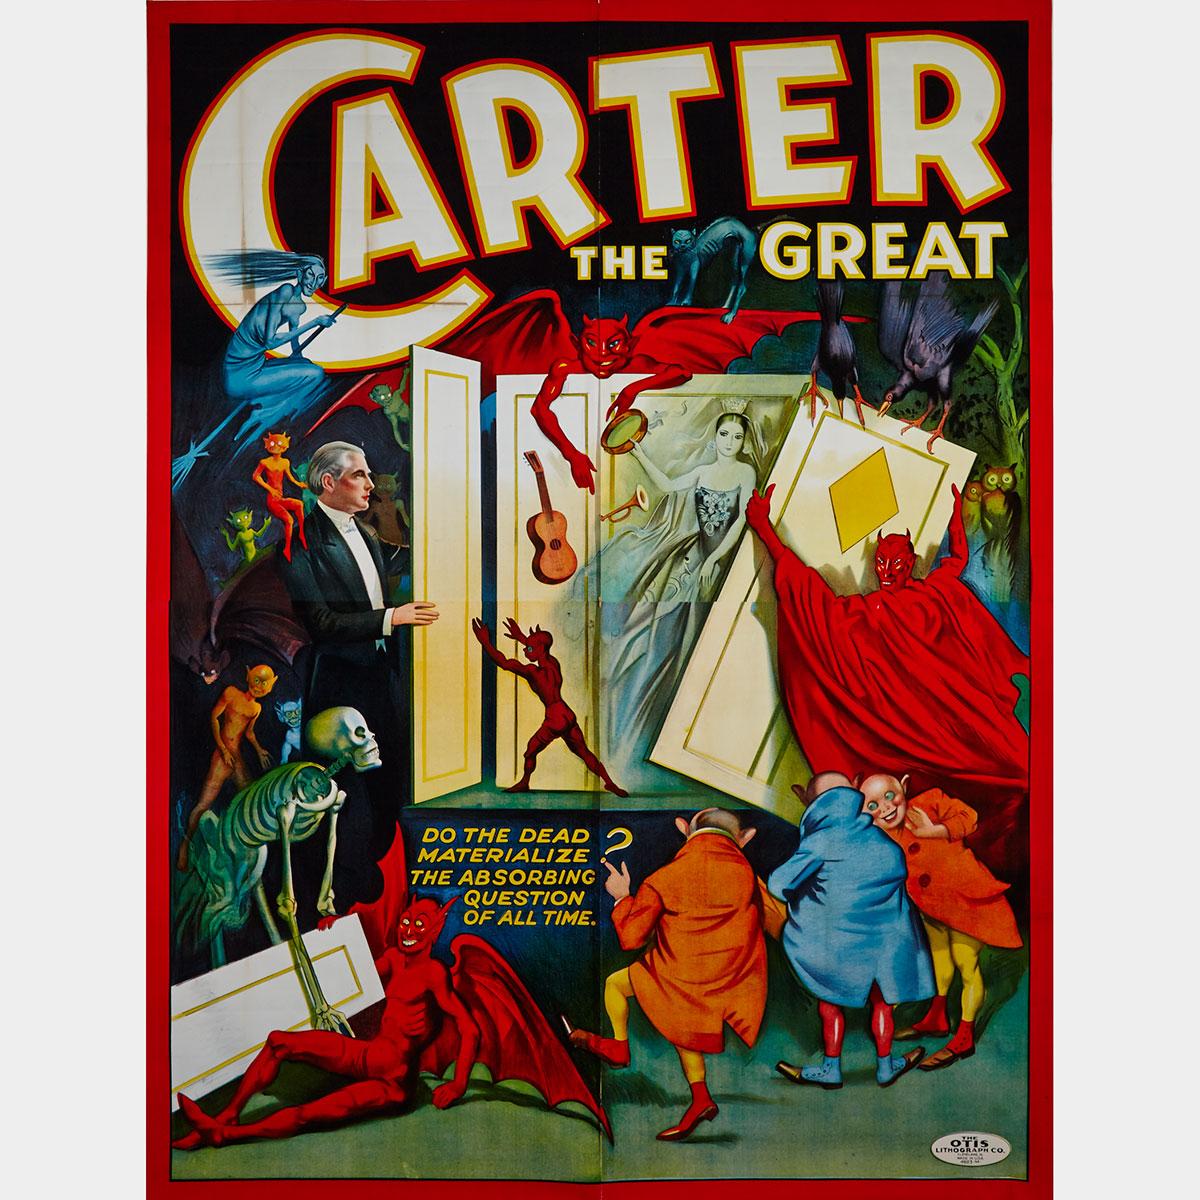 Oversize American Chromolithograph Poster, early 20th century